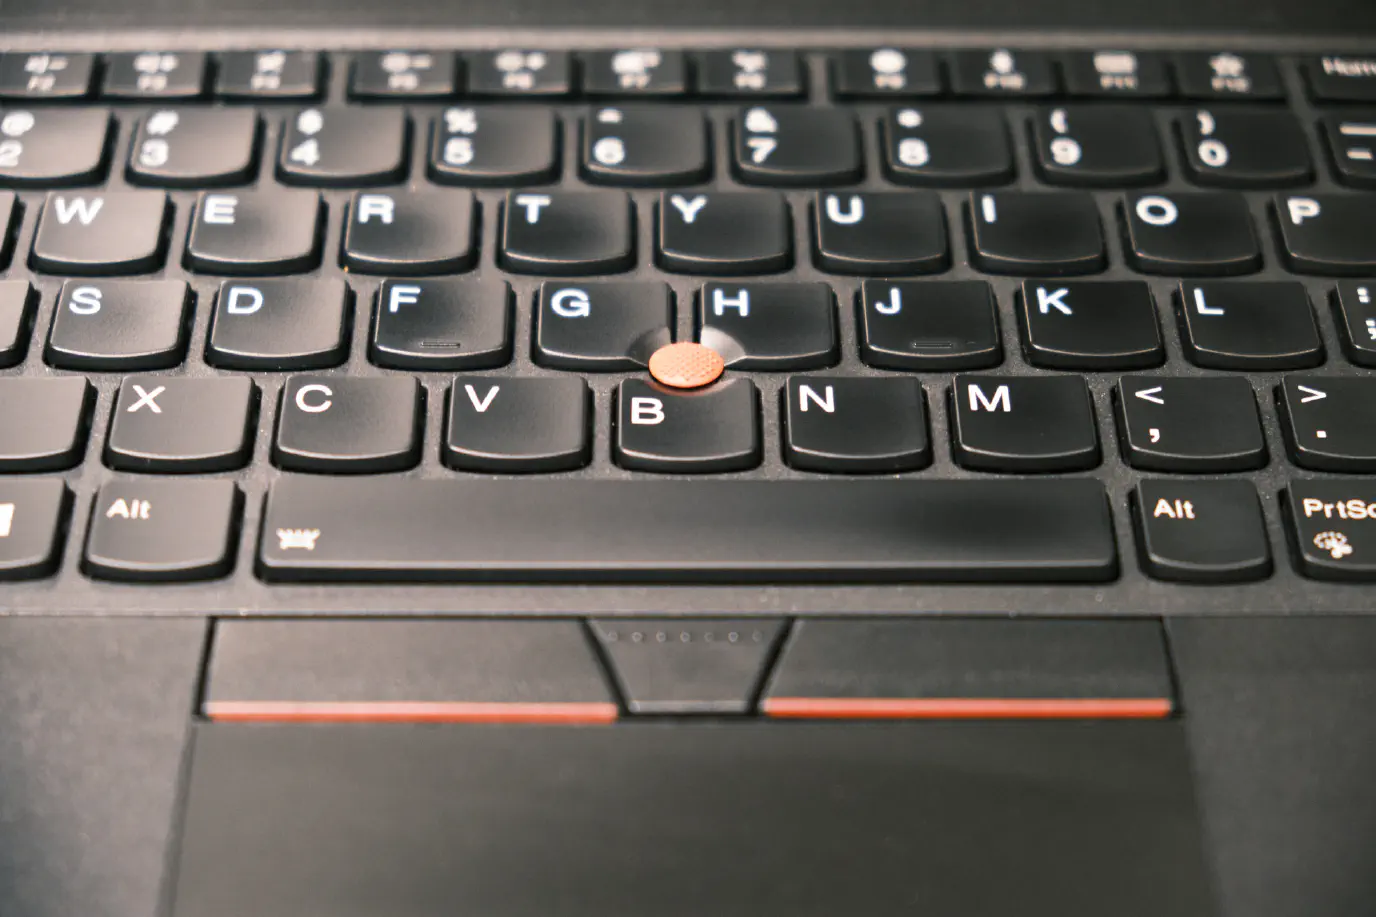 A ThinkPad P53 keyboard focused on the TrackPoint